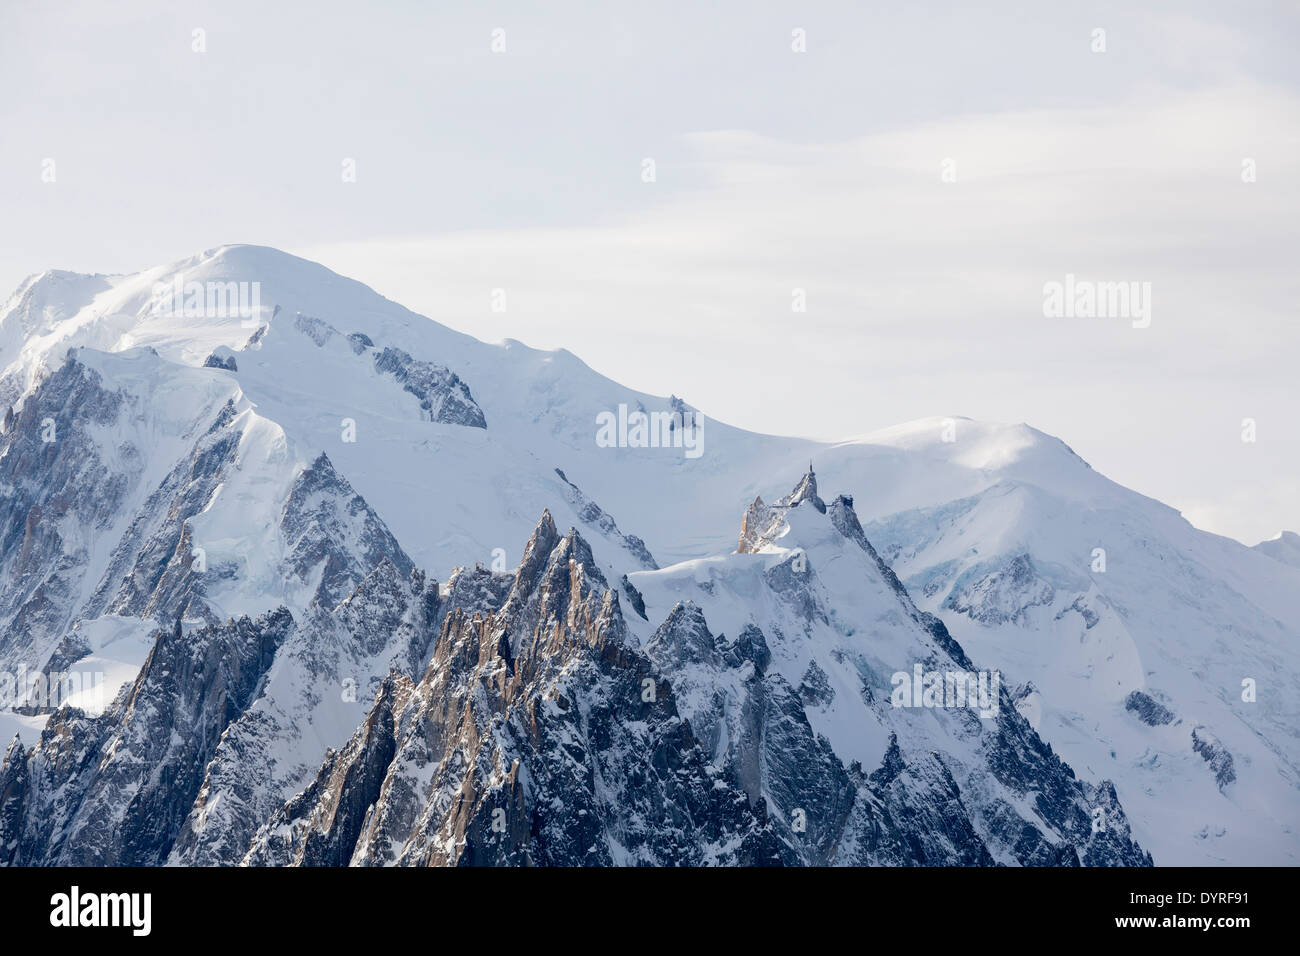 The Aiguille Du Midi gondola station (R), with Mont Blanc mountain in the background (C), seen from the top of Grand Montets. Stock Photo